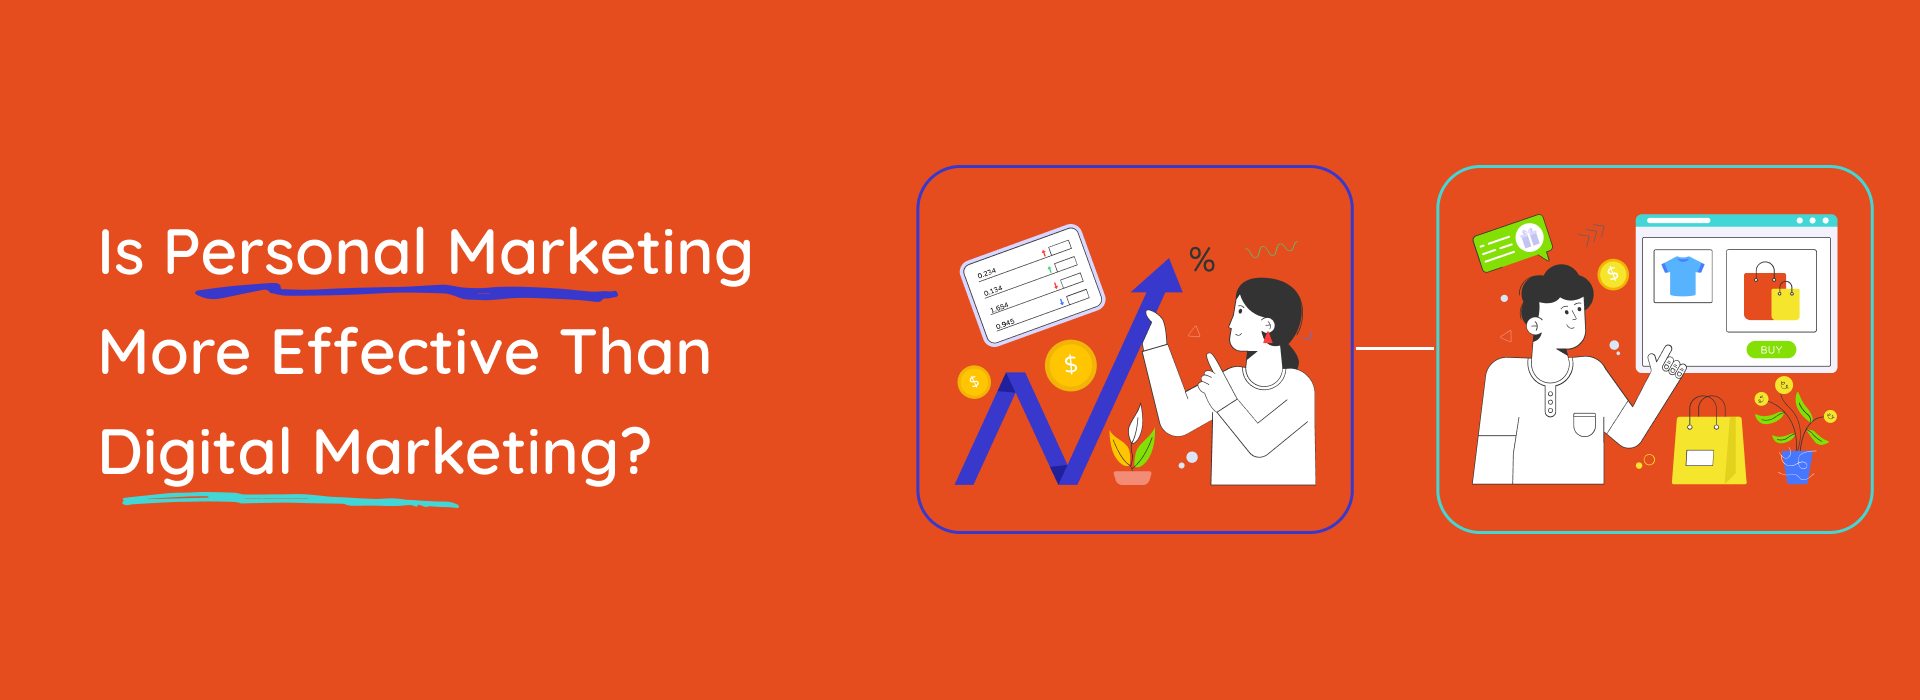 Is Personal Marketing More Effective Than Digital Marketing?